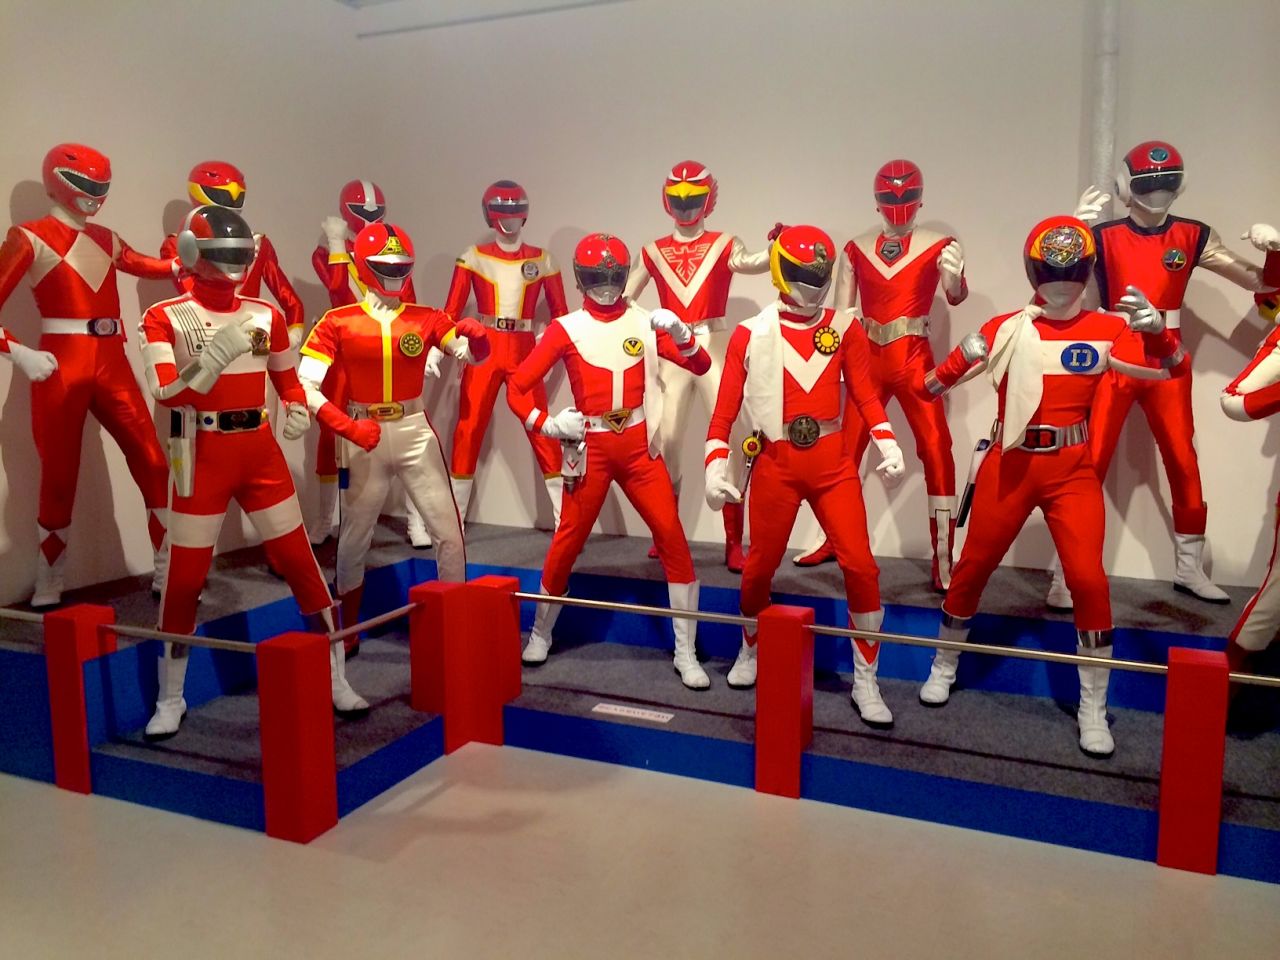 A fearsome group of Super Sentai in the Toei Kyoto Studio Park Anime Museum. The U.S. TV series "Power Rangers" was based on Japan's "Super Sentai" show. 